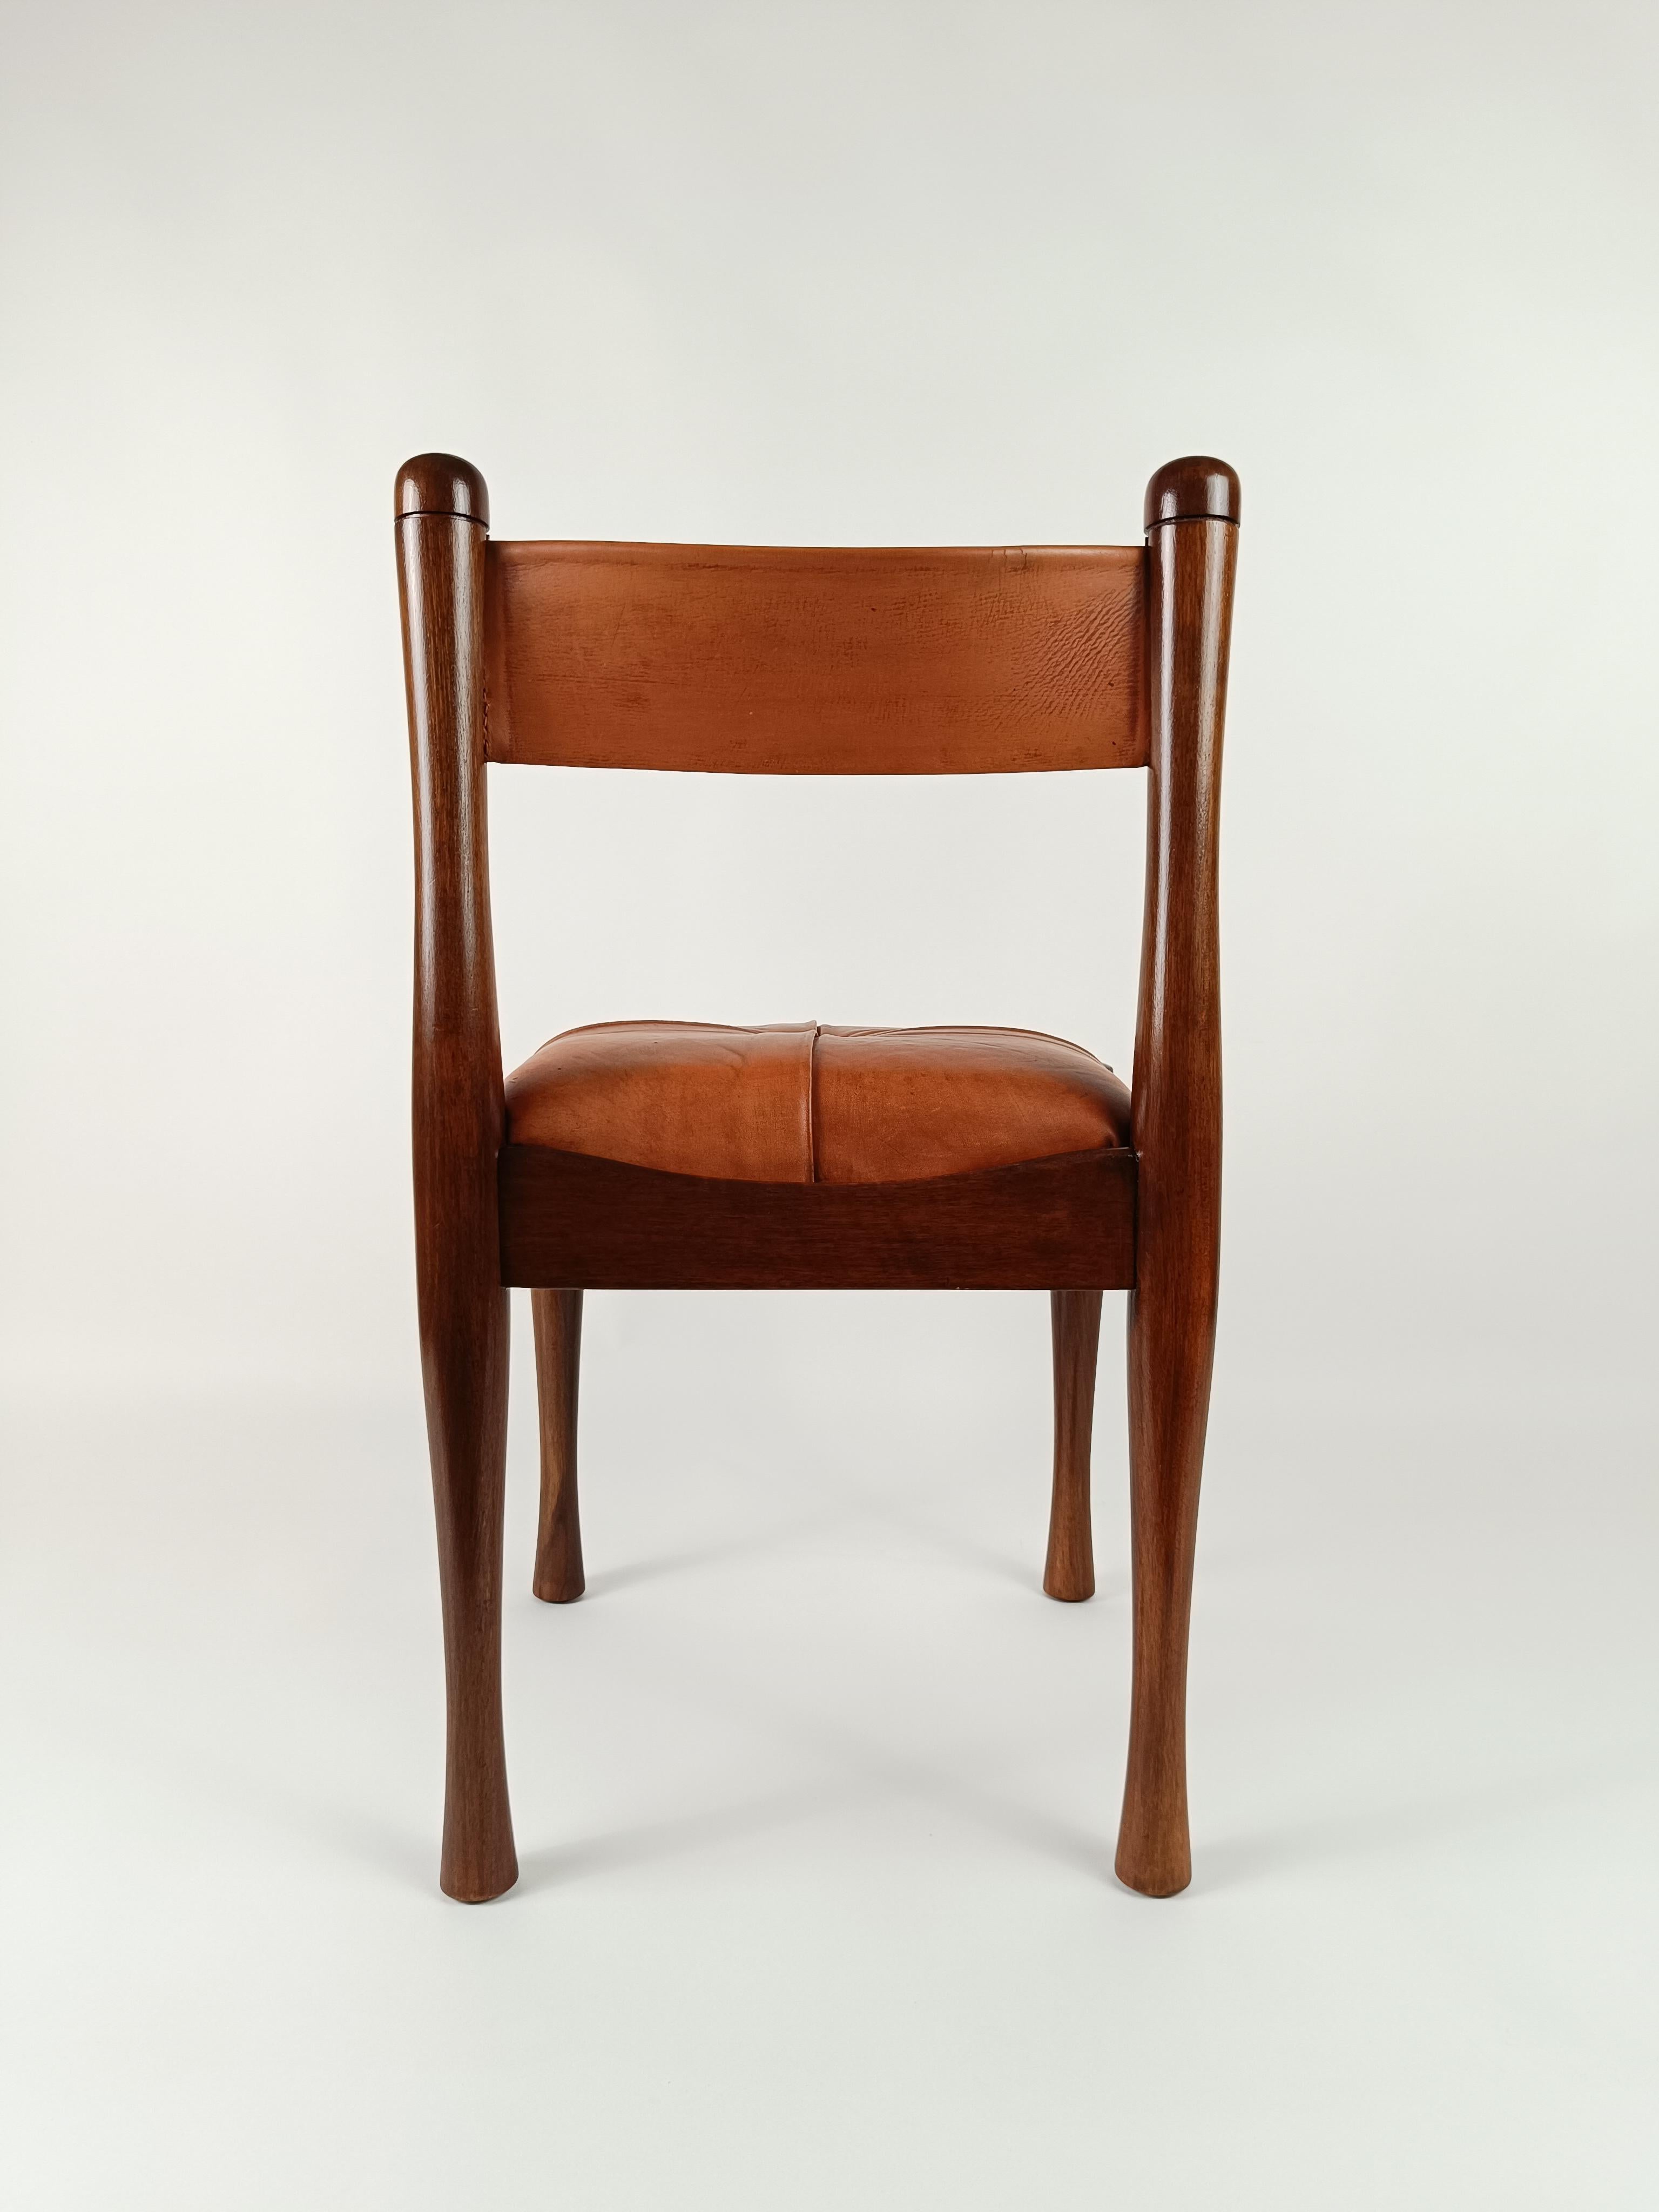 A set of 4 Italian Chairs in Wood and Cognac Leather by S. Coppola for Bernini  For Sale 9